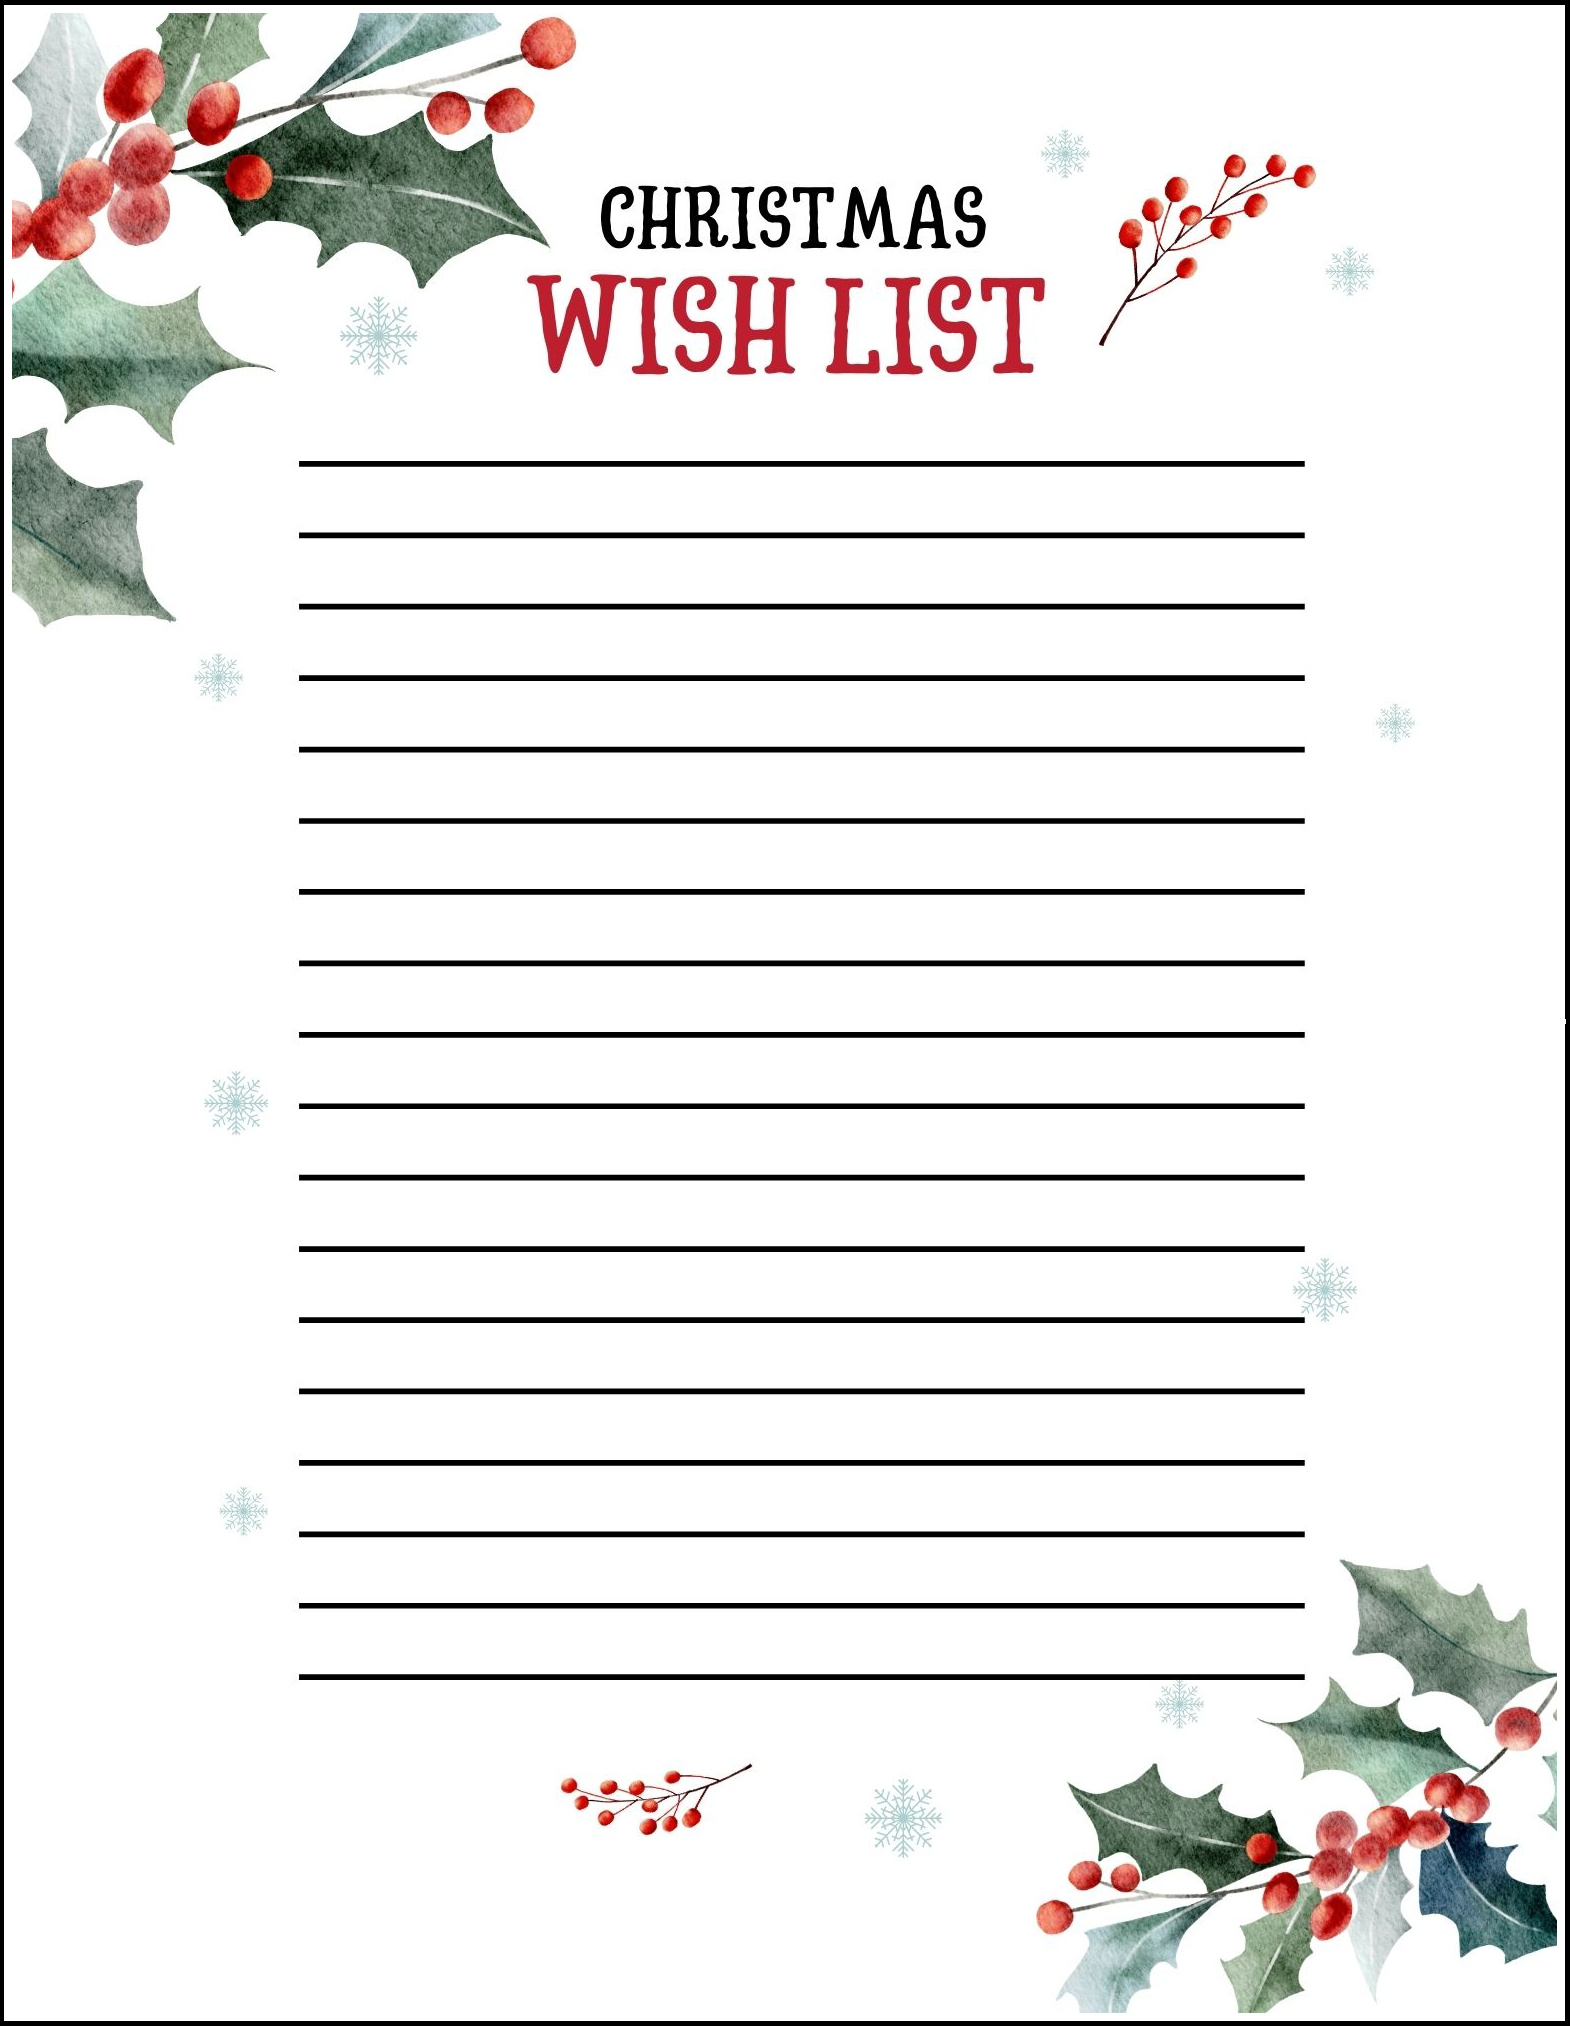 Christmas wish list with holly print